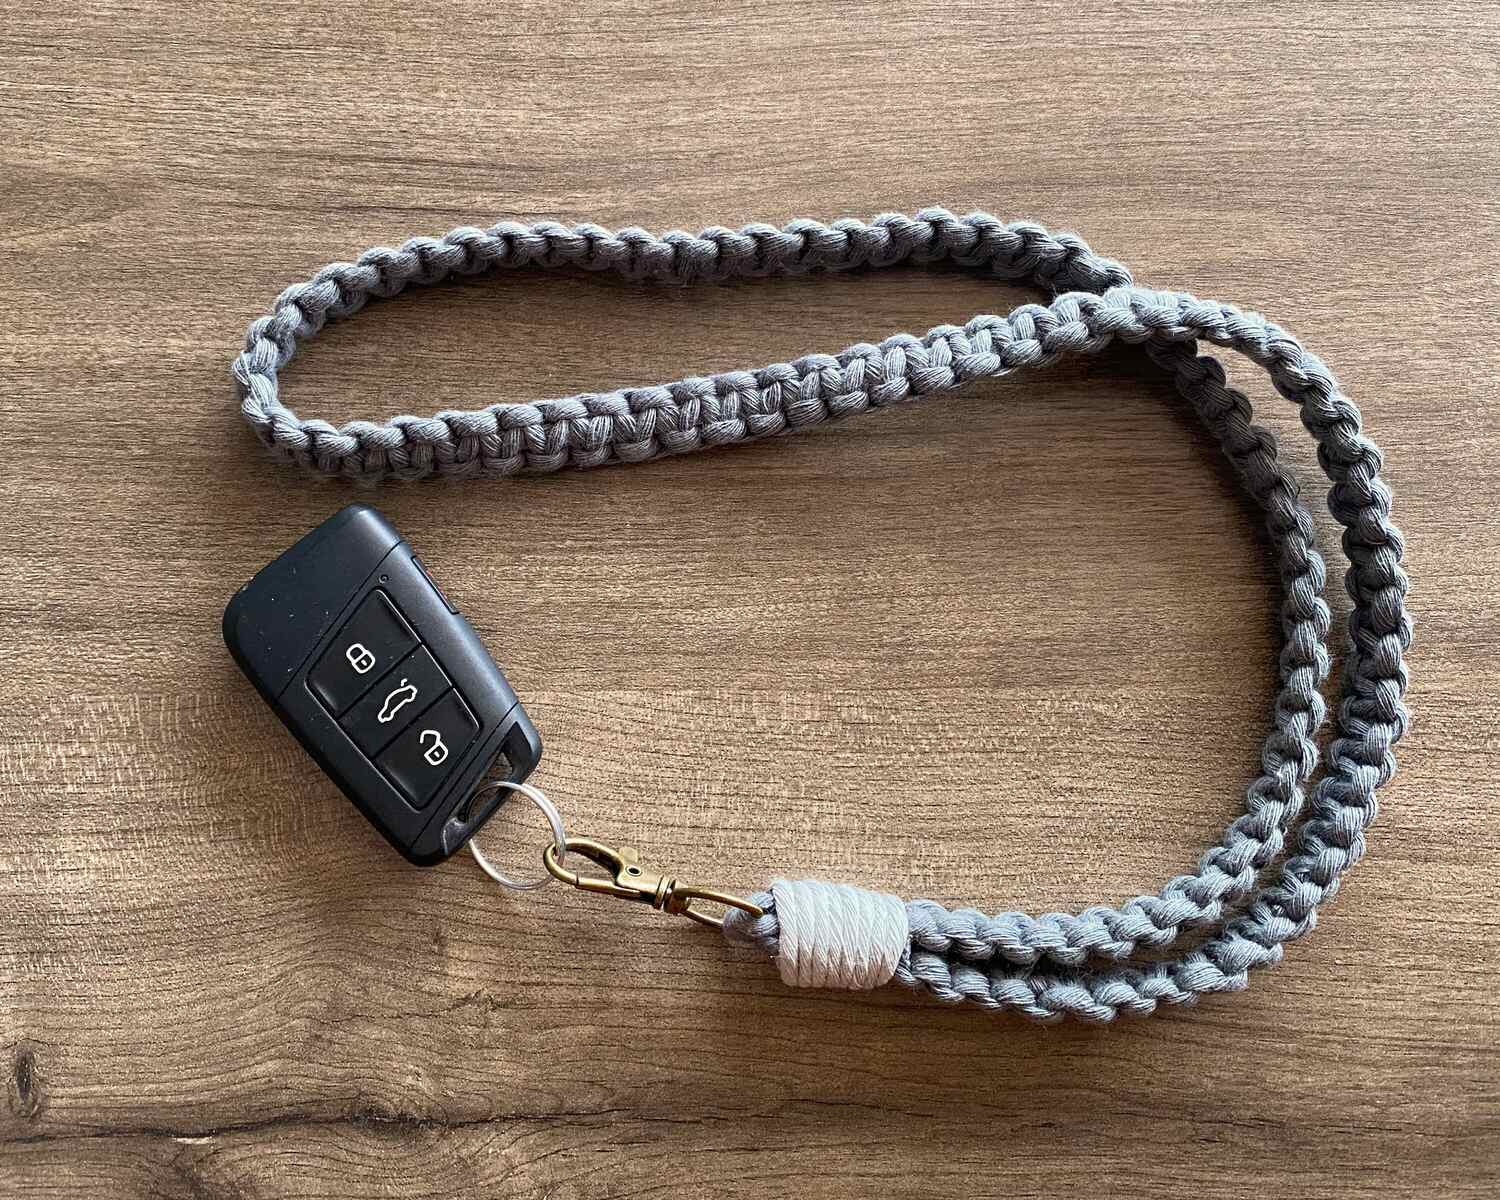 crafting-intricate-lanyards-with-macrame-techniques